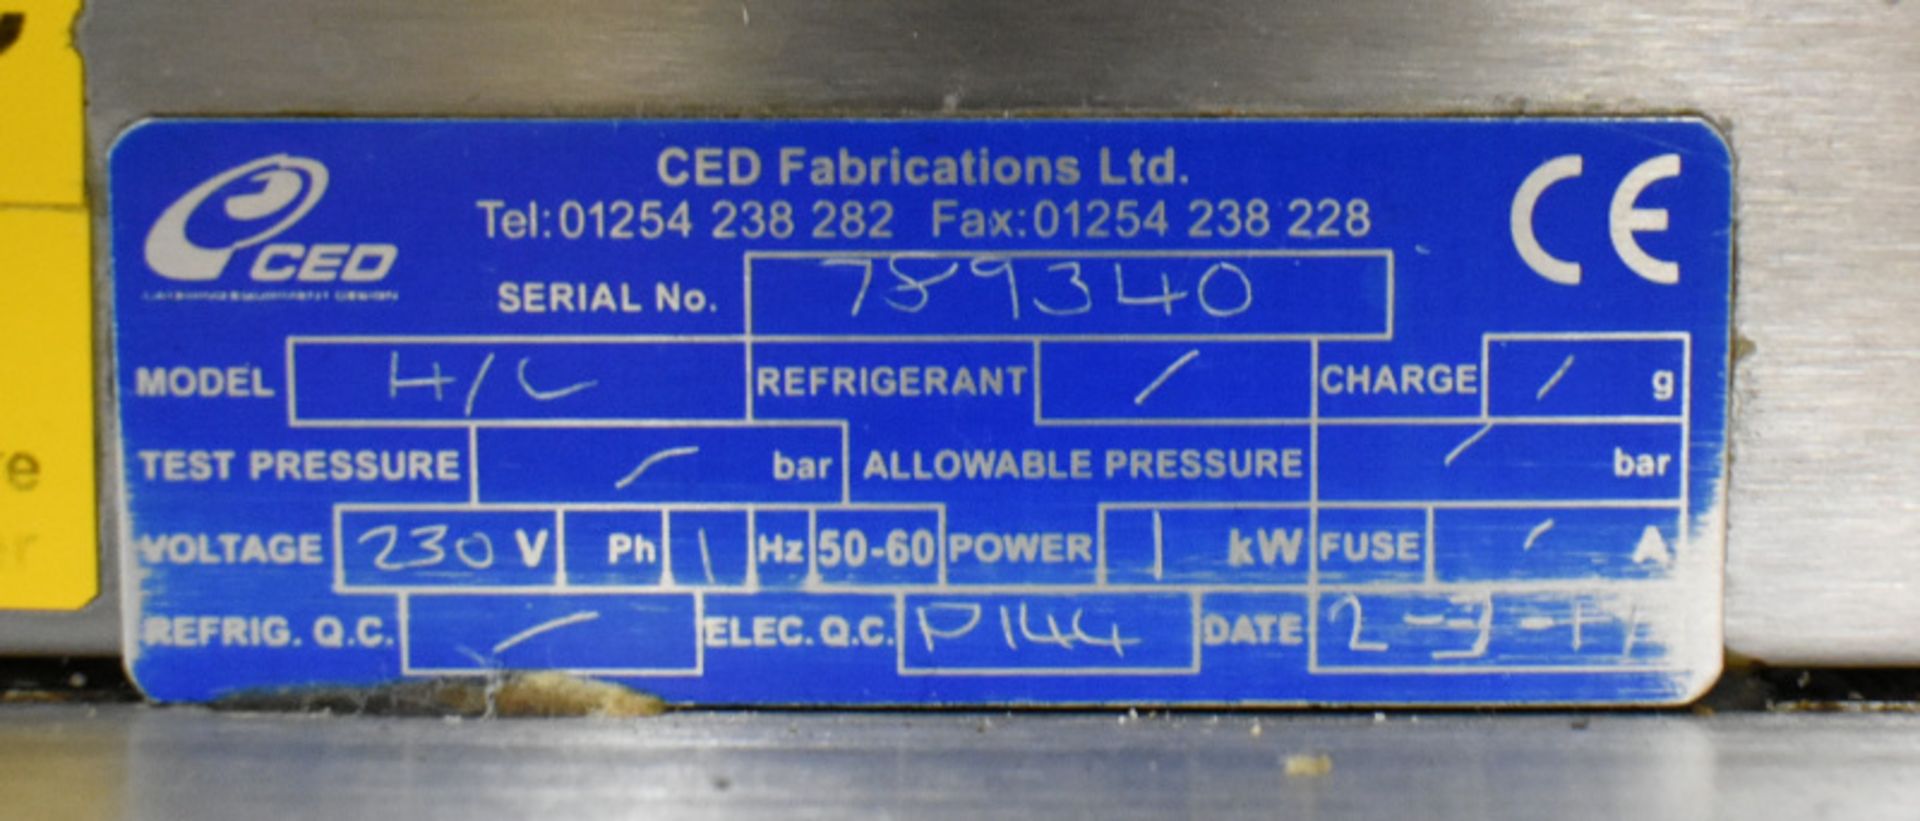 CED Fabrications Hot Cupboard - Image 6 of 6